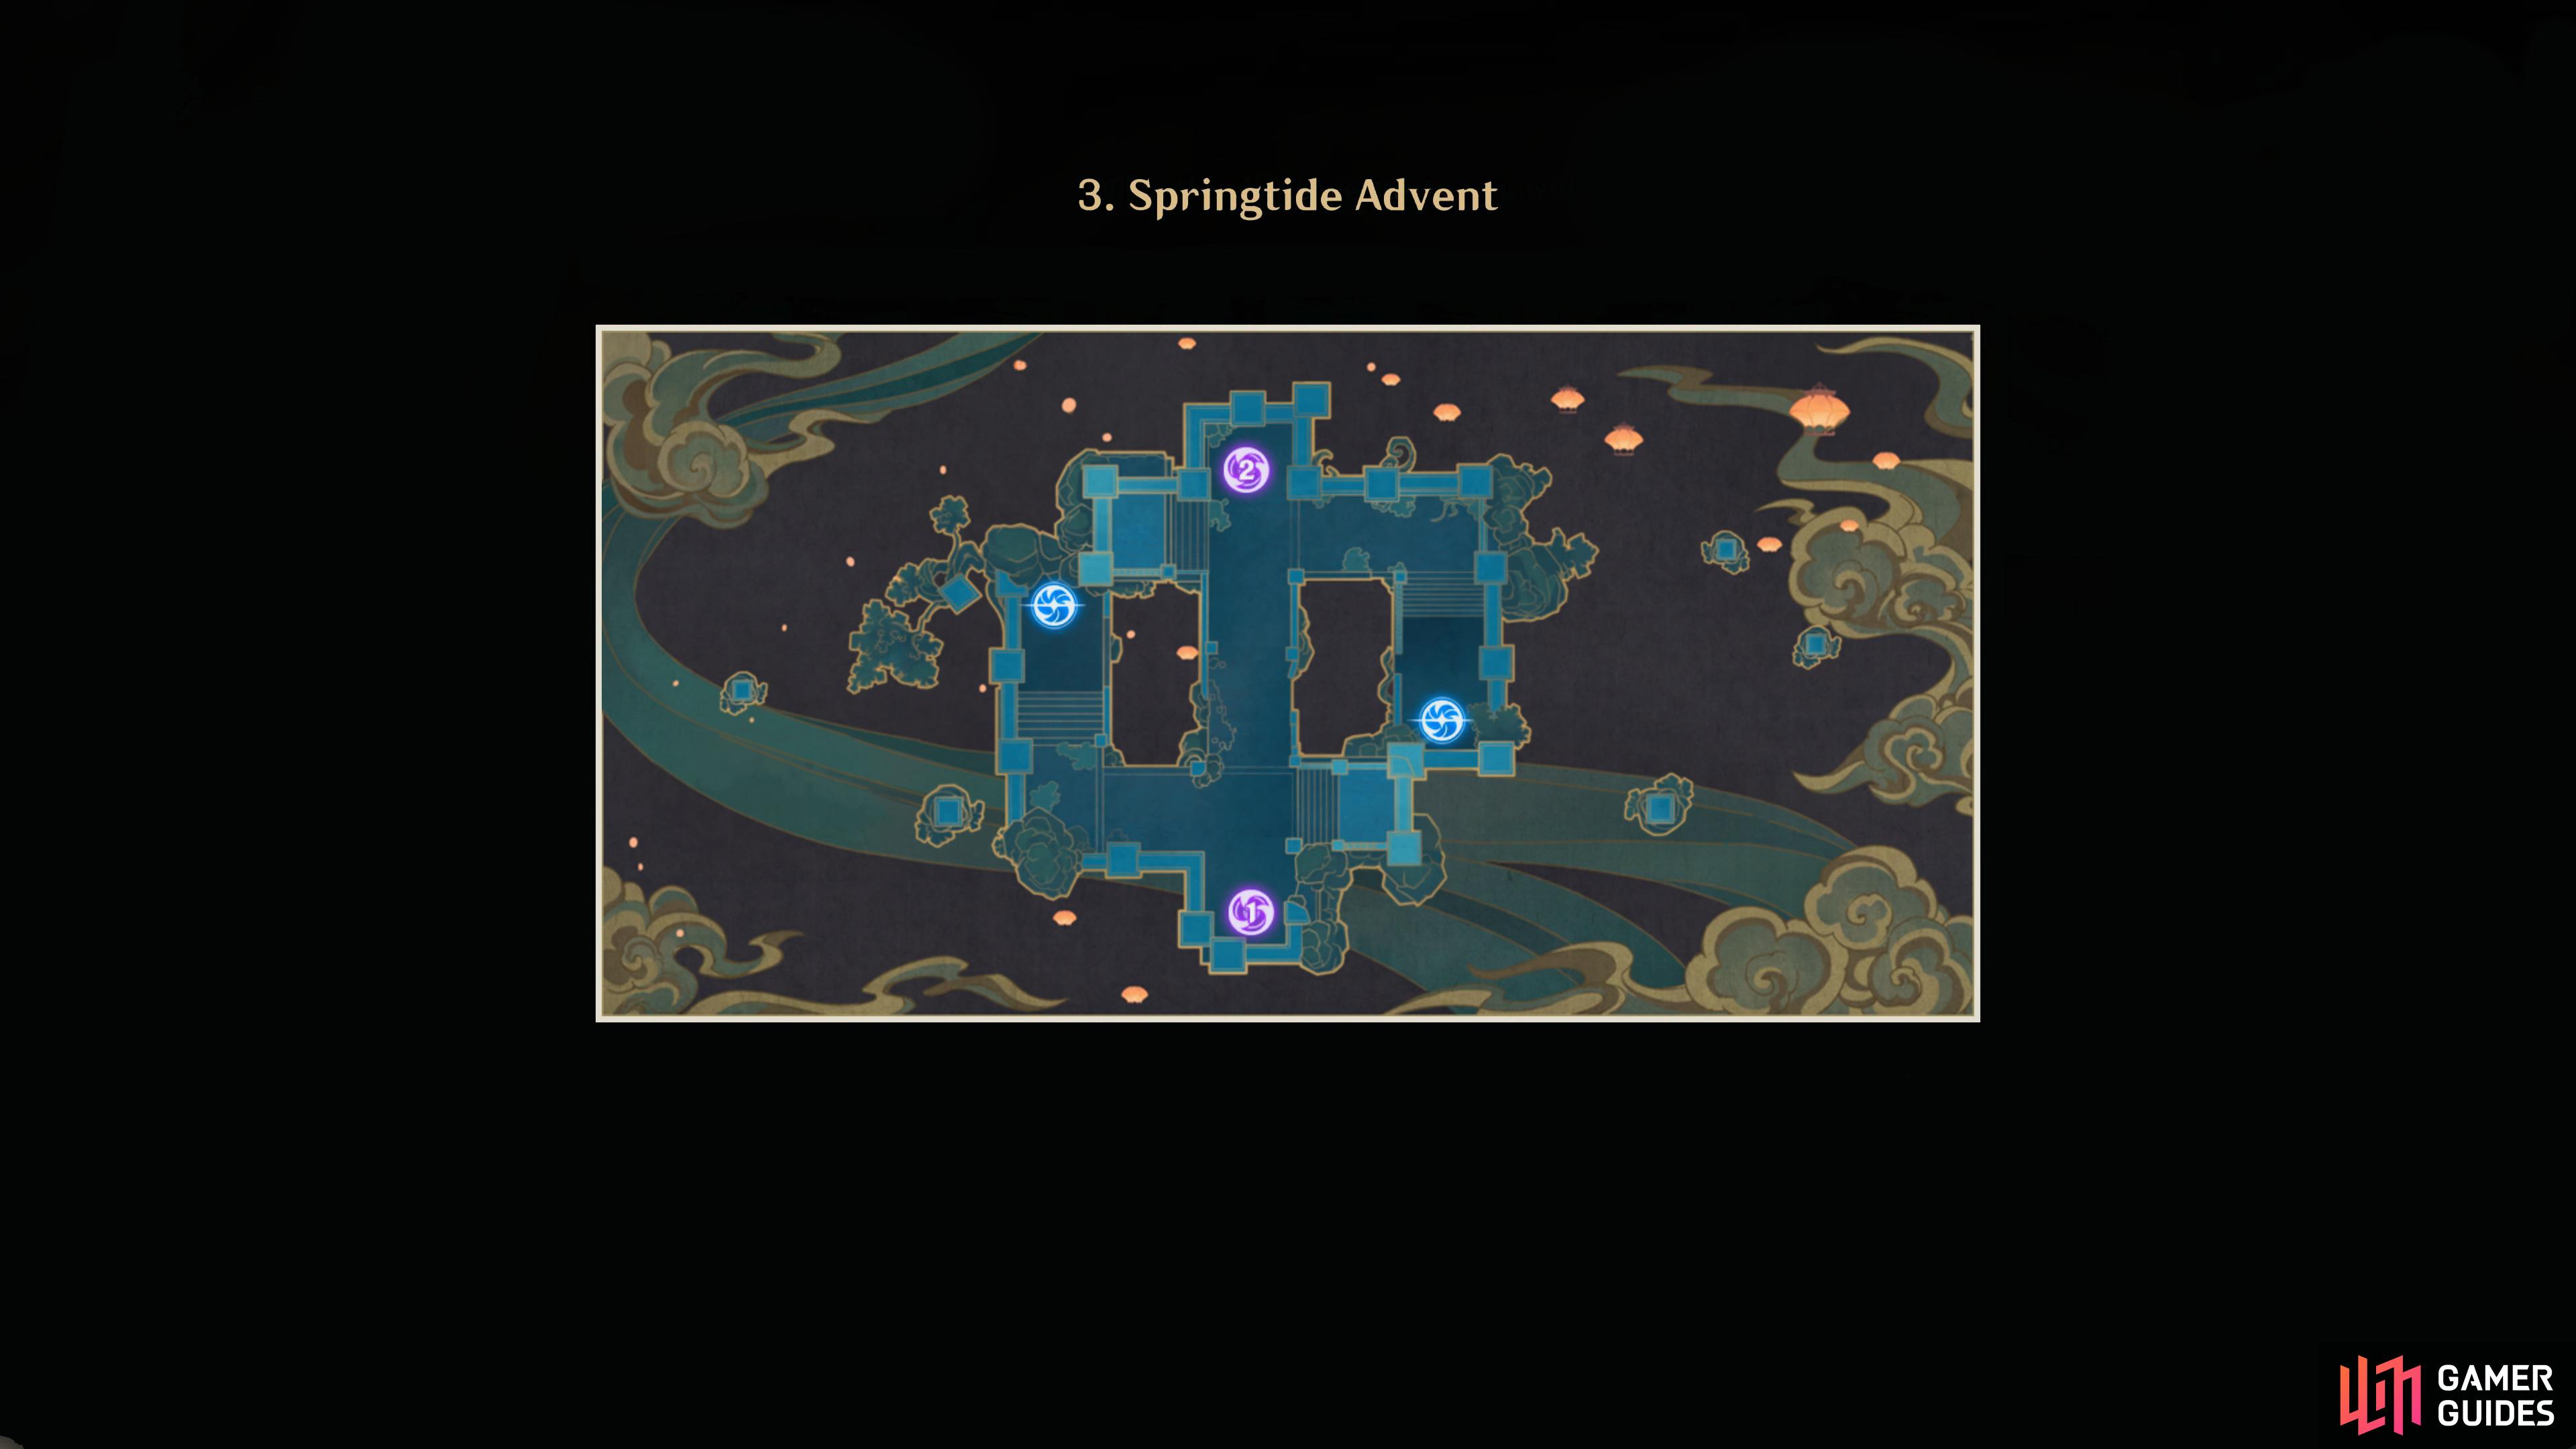 An image of the Springtide Advent map.